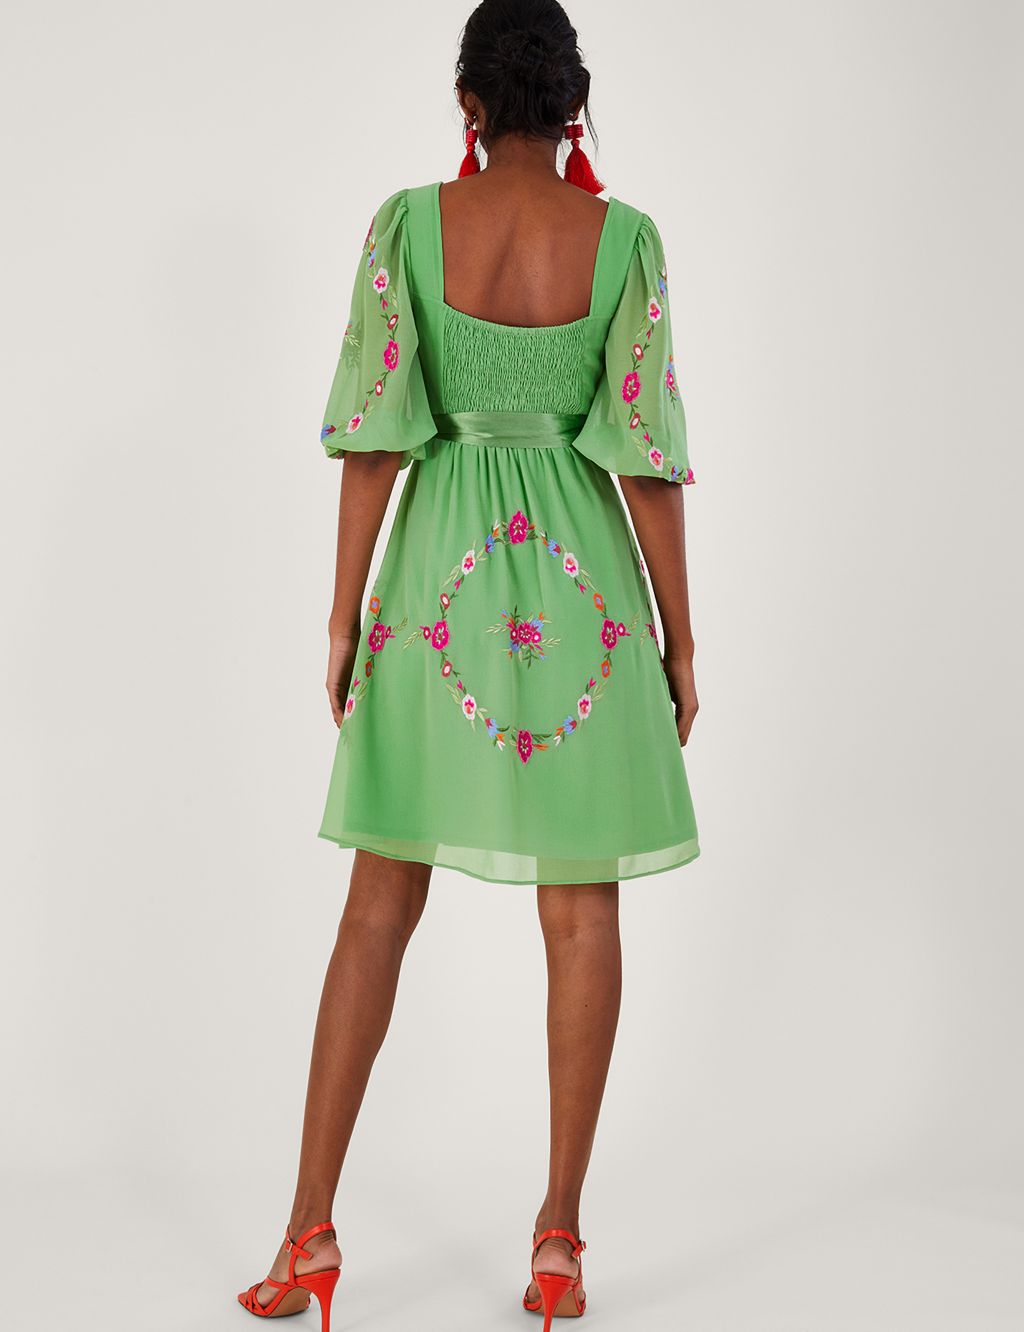 Floral Embroidered Square Neck Waisted Dress image 4